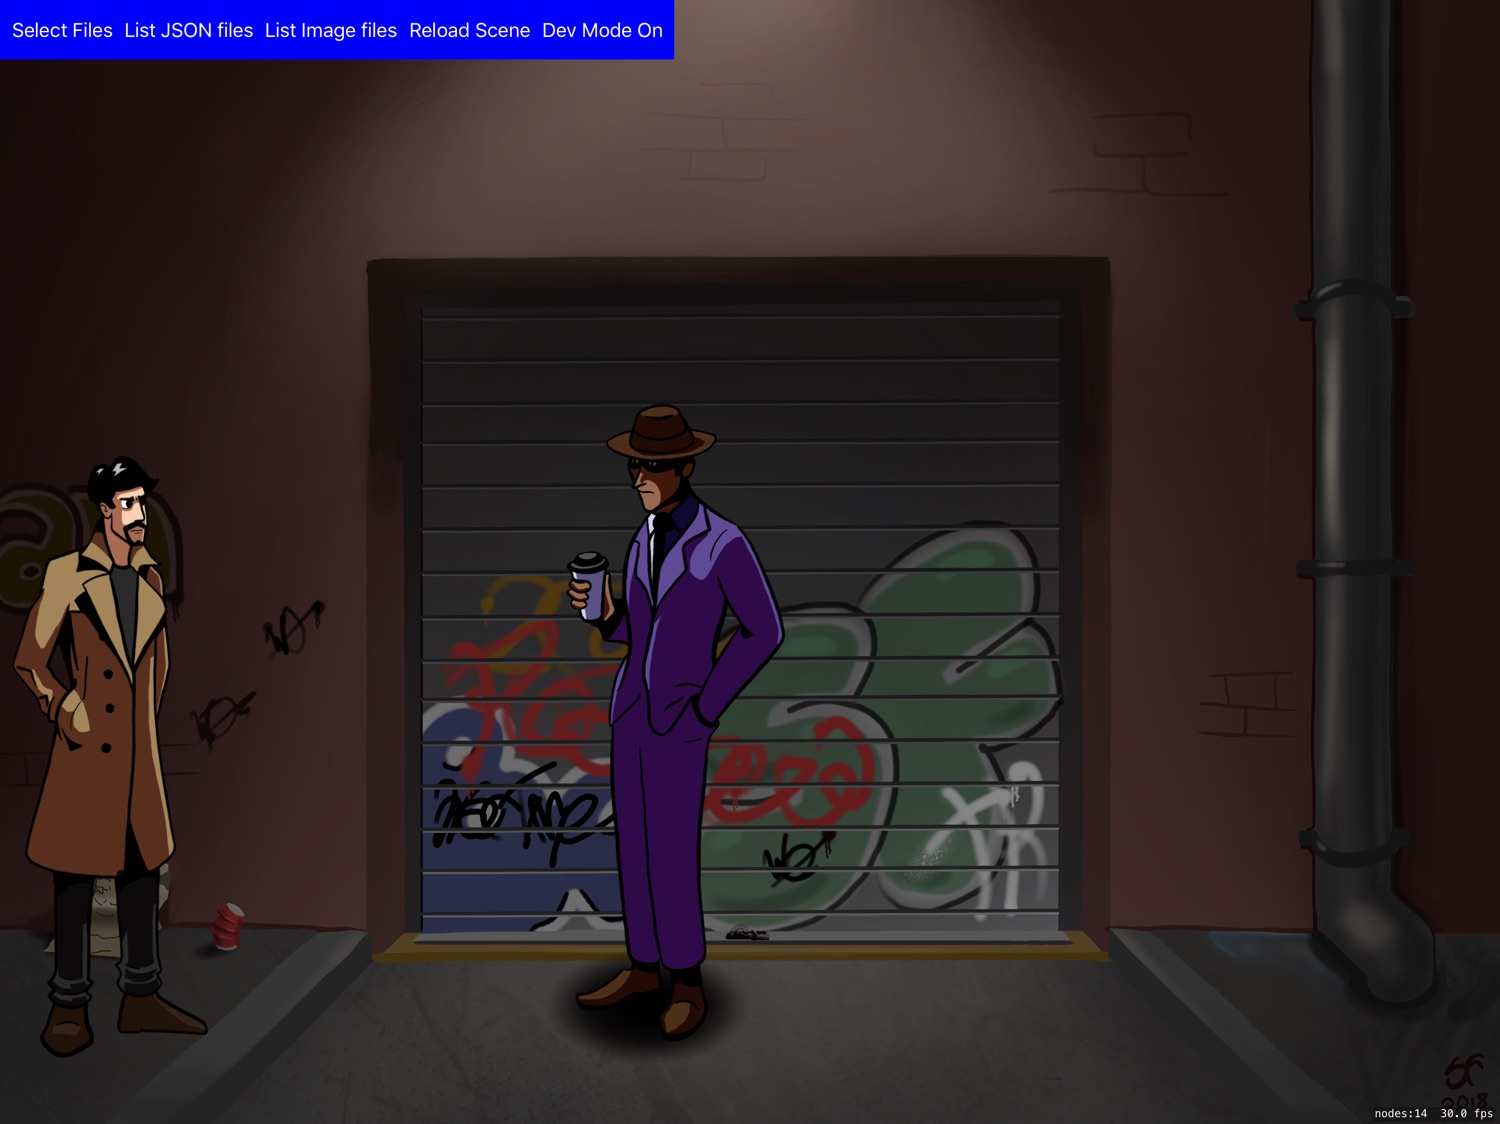 A screenshot of my adventure game scene after reloading. The scene has two characters facing each other in a dark alley, one in a pale yellow trench coat the other in a purple suit. The non-player character is now in a new position.